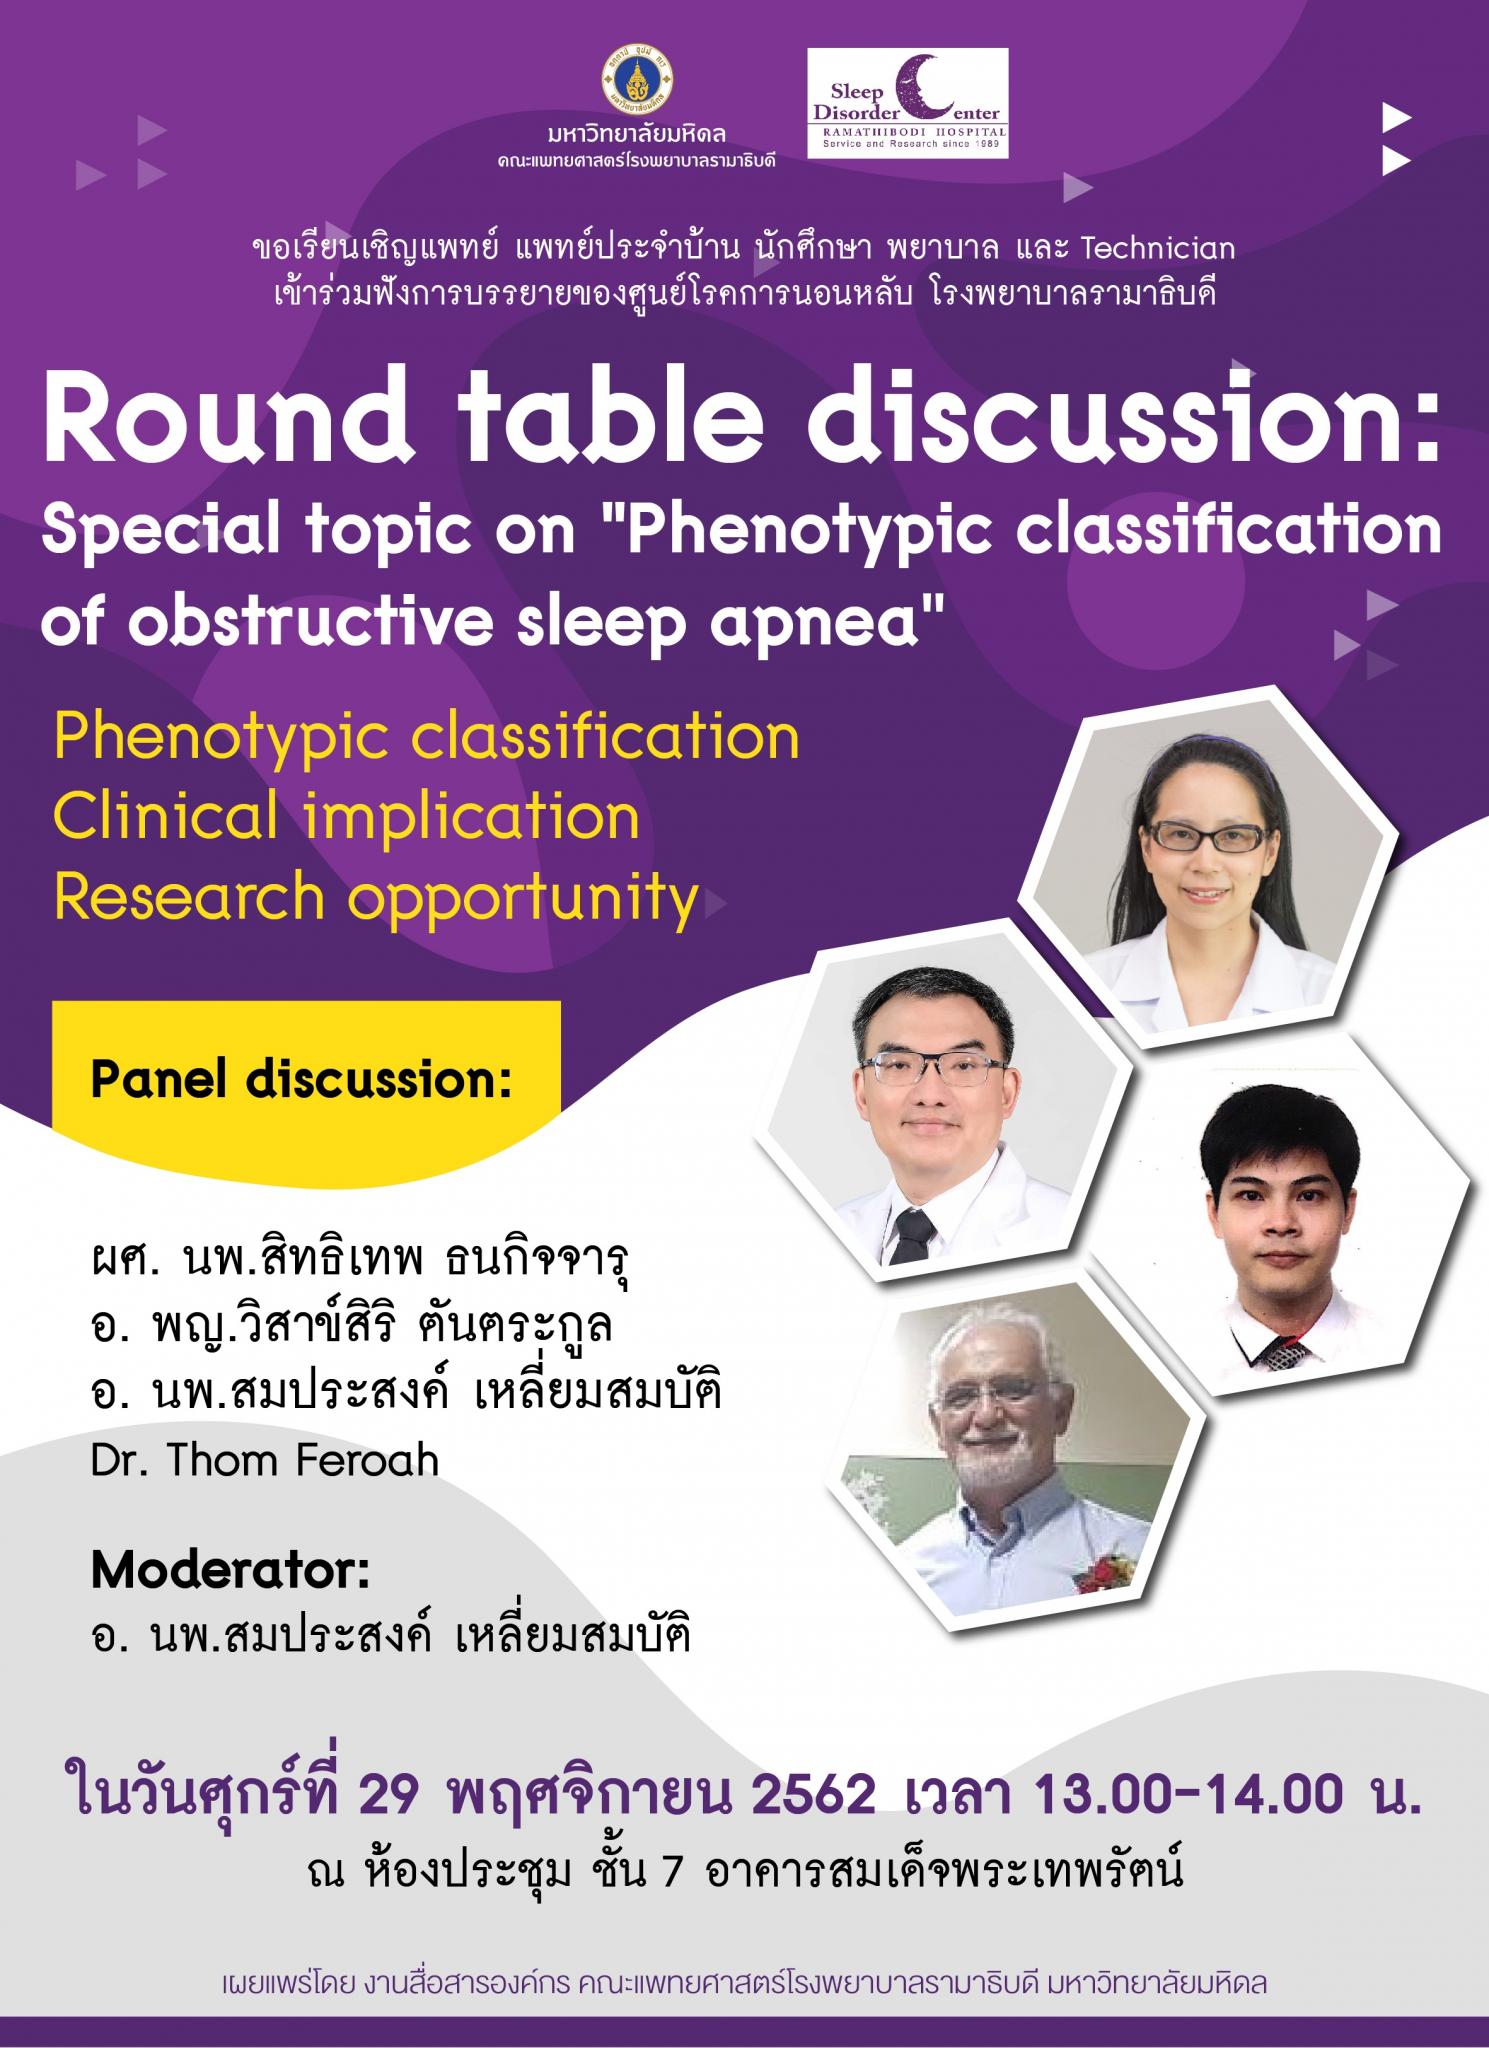 Round table discussion: Special topic on "Phenotypic classification of obstructive sleep apnea"